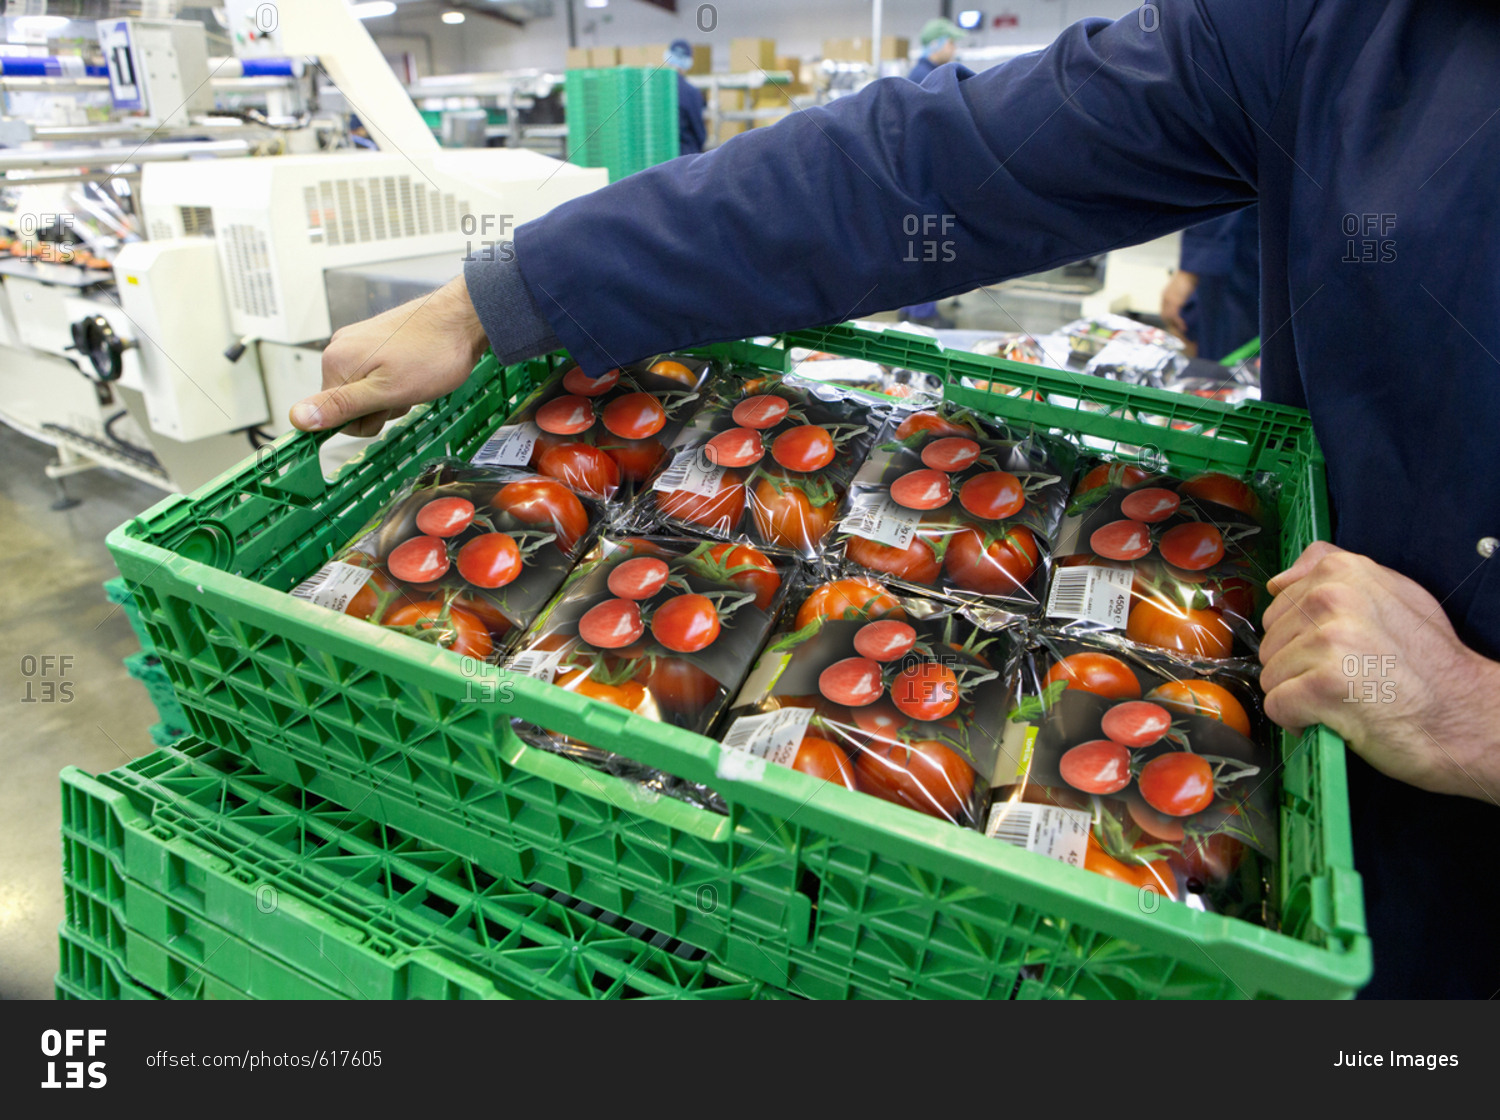 Worker lifting crate of packaged tomatoes in food processing plant